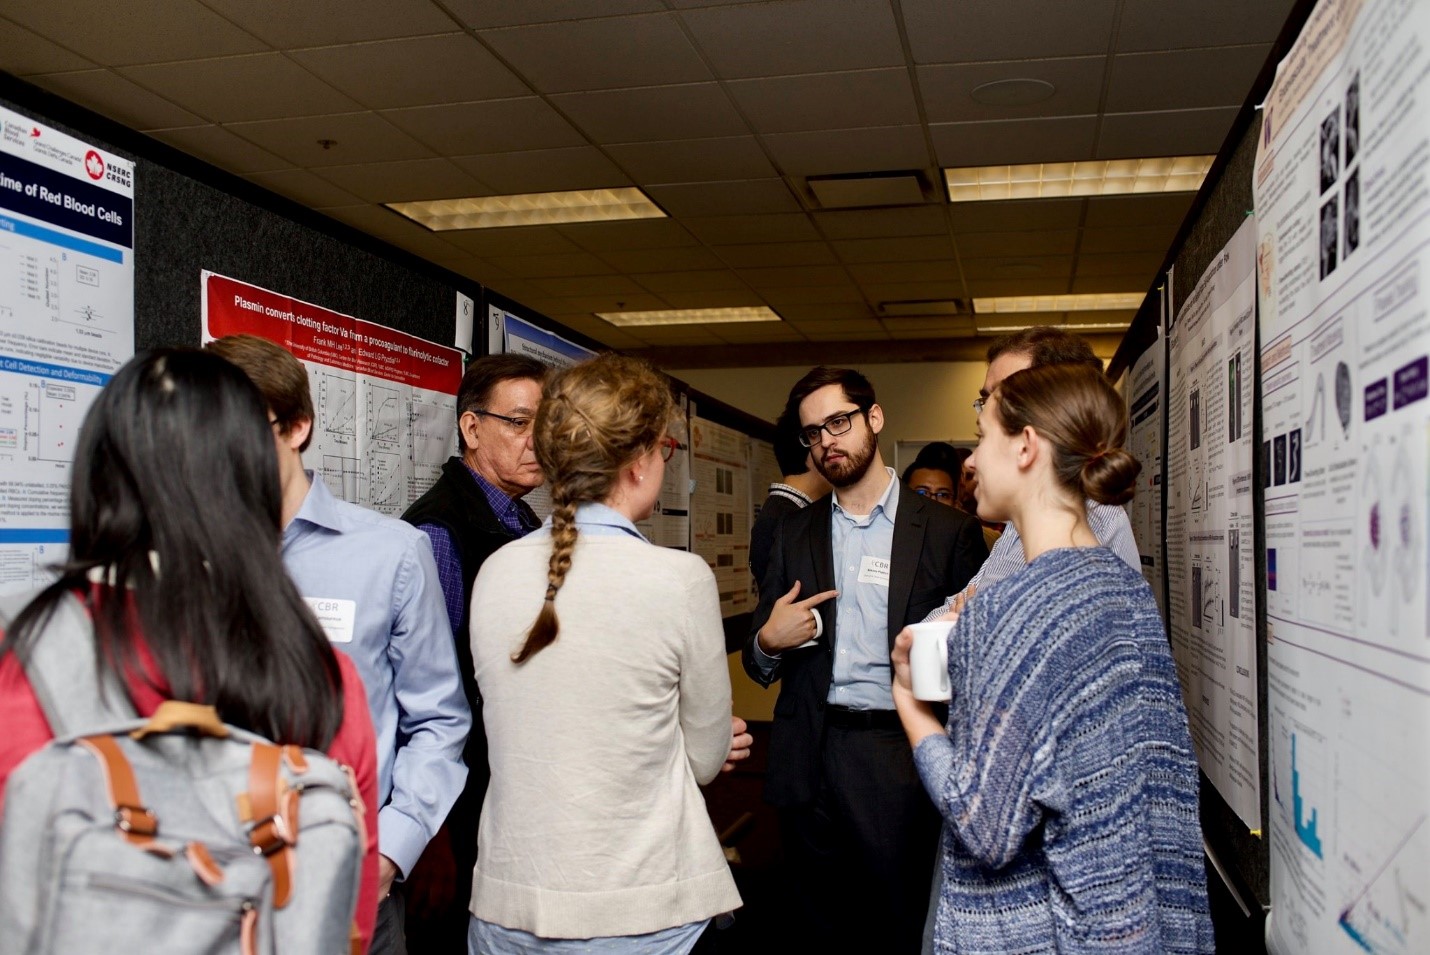 ttendees discuss posters during the 13th annual Earl W. Davie Symposium.